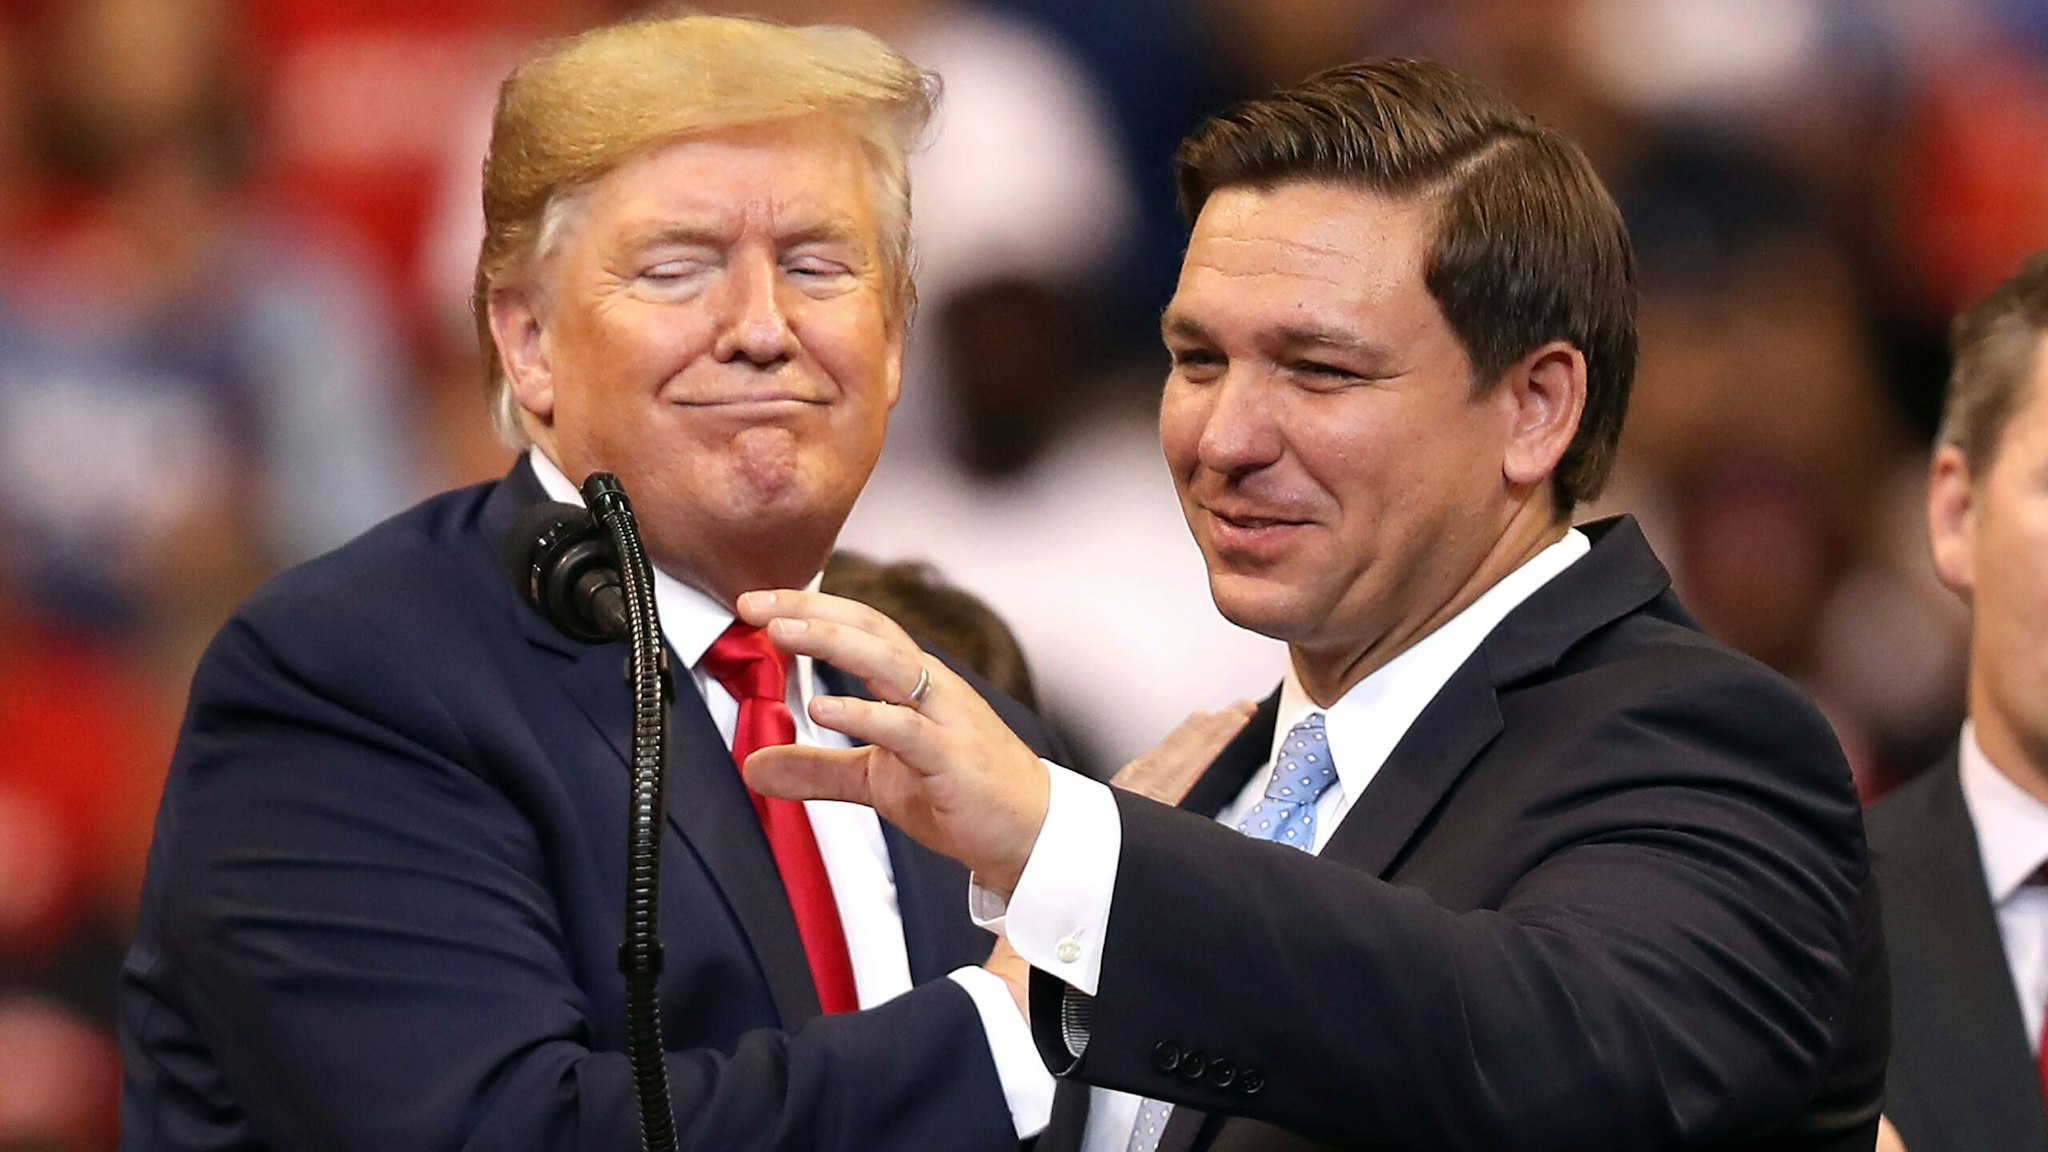 SUNRISE, FLORIDA - NOVEMBER 26: U.S. President Donald Trump introduces Florida Governor Ron DeSantis during a homecoming campaign rally at the BB&amp;T Center on November 26, 2019 in Sunrise, Florida. President Trump continues to campaign for re-election in the 2020 presidential race.